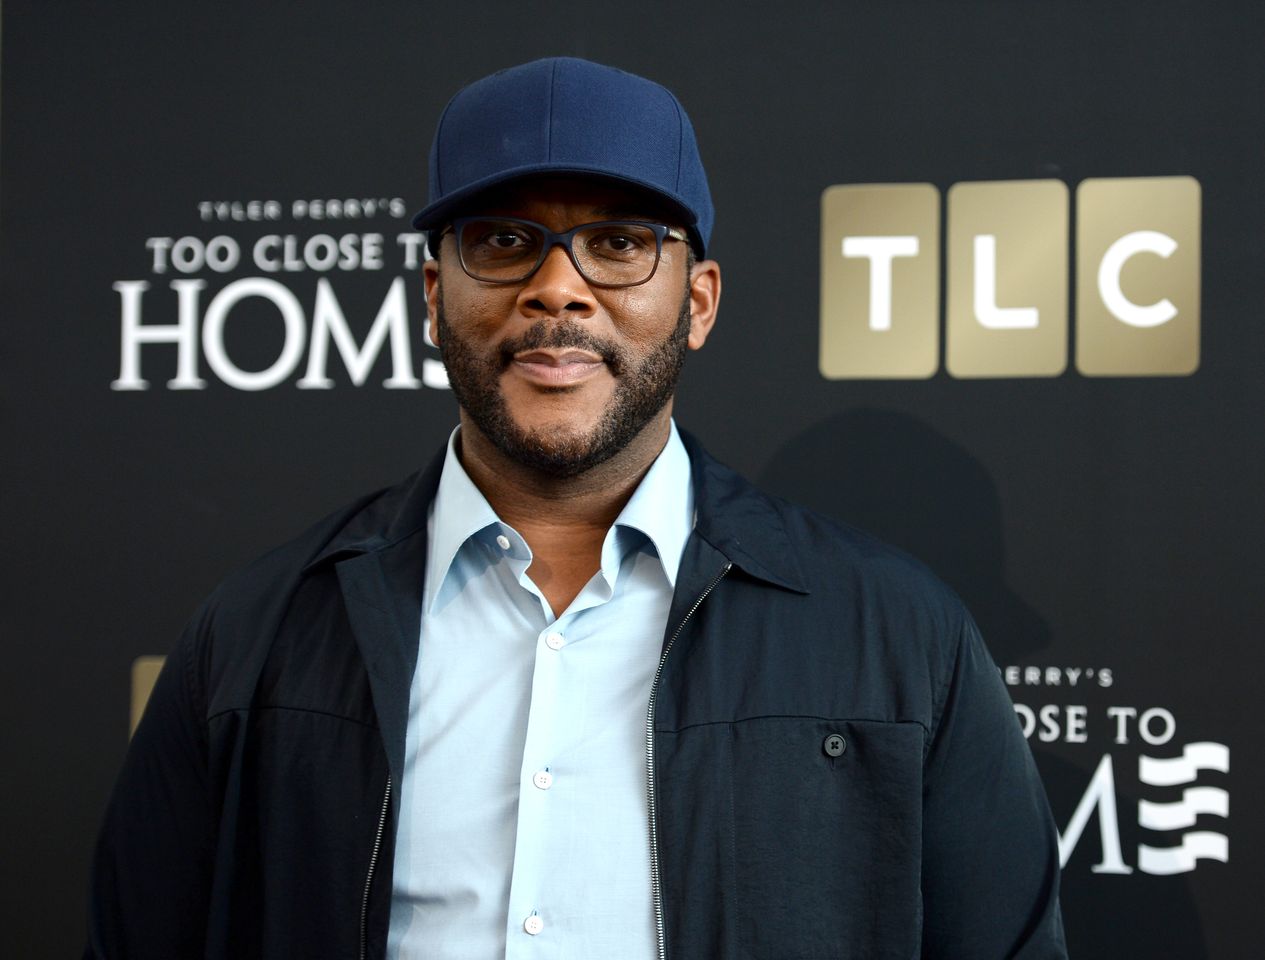 Tyler Perry at TLC's "Too Close To Home" screening in Beverly Hills on August 16, 2016. | Source: Getty Images